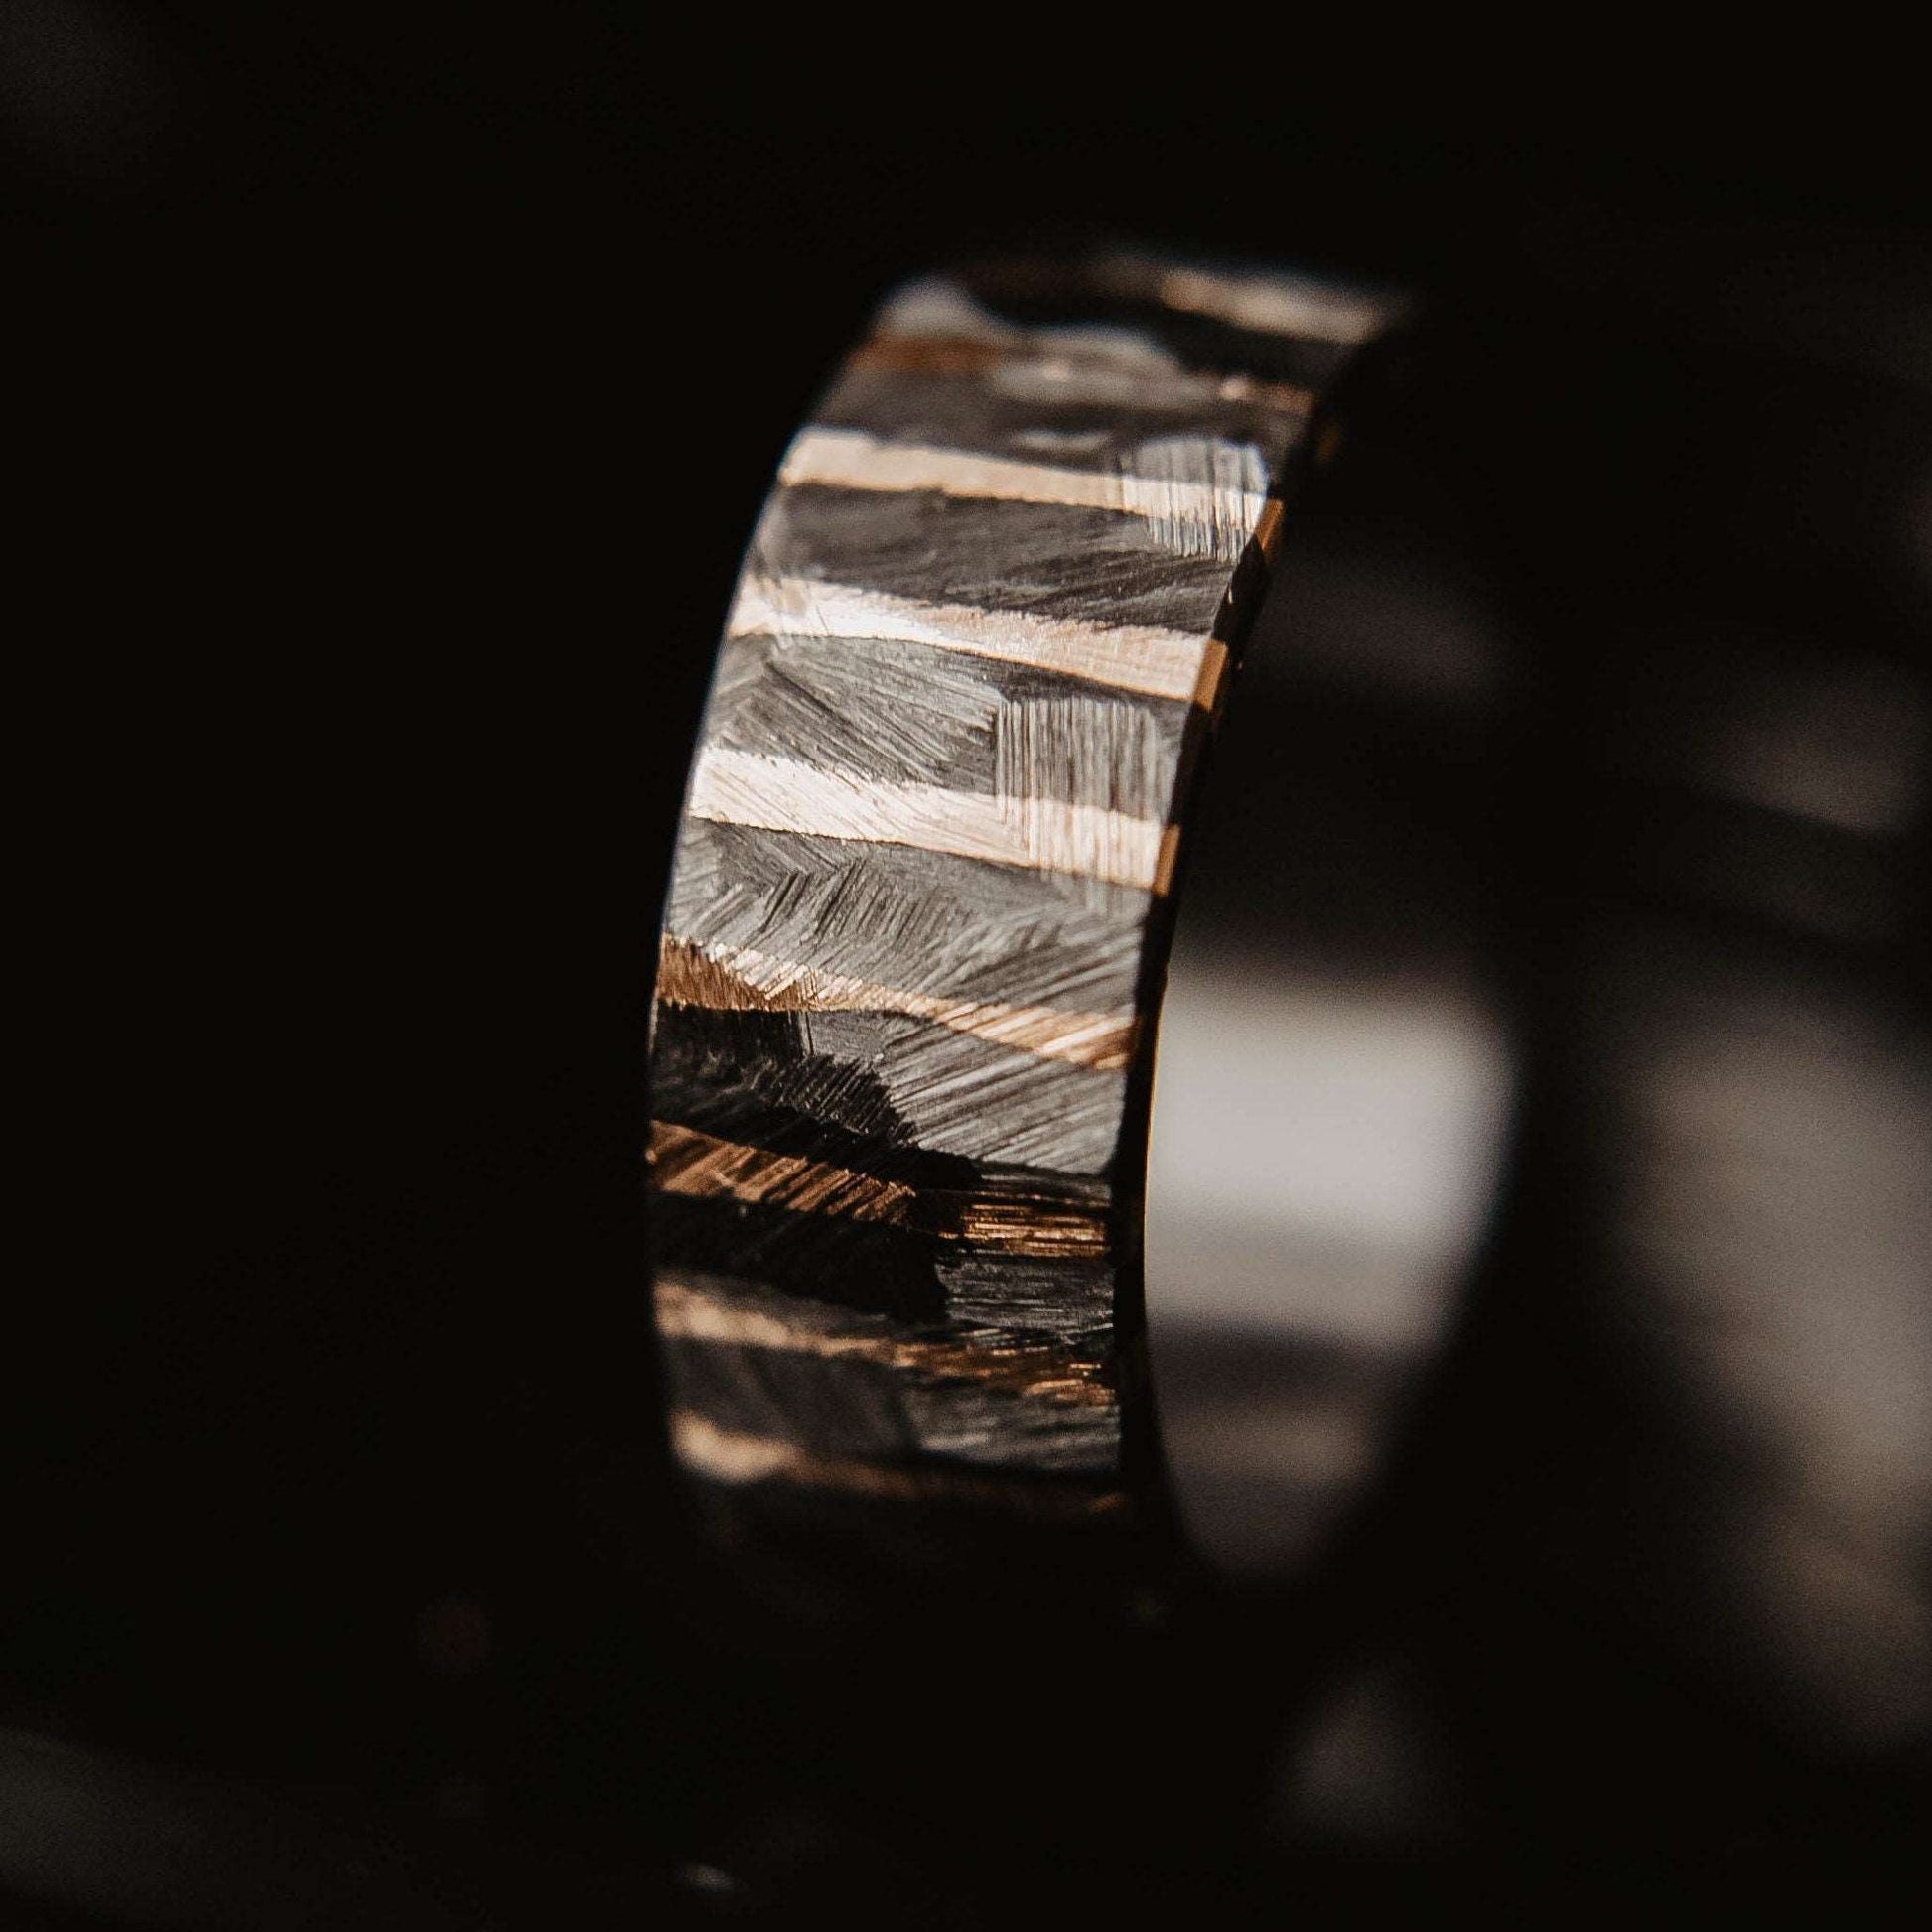 Gold Twilight Wedding Band. This photo shows a roughly faceted zirconium wedding band with 14k gold stripes (Vertical with black background)